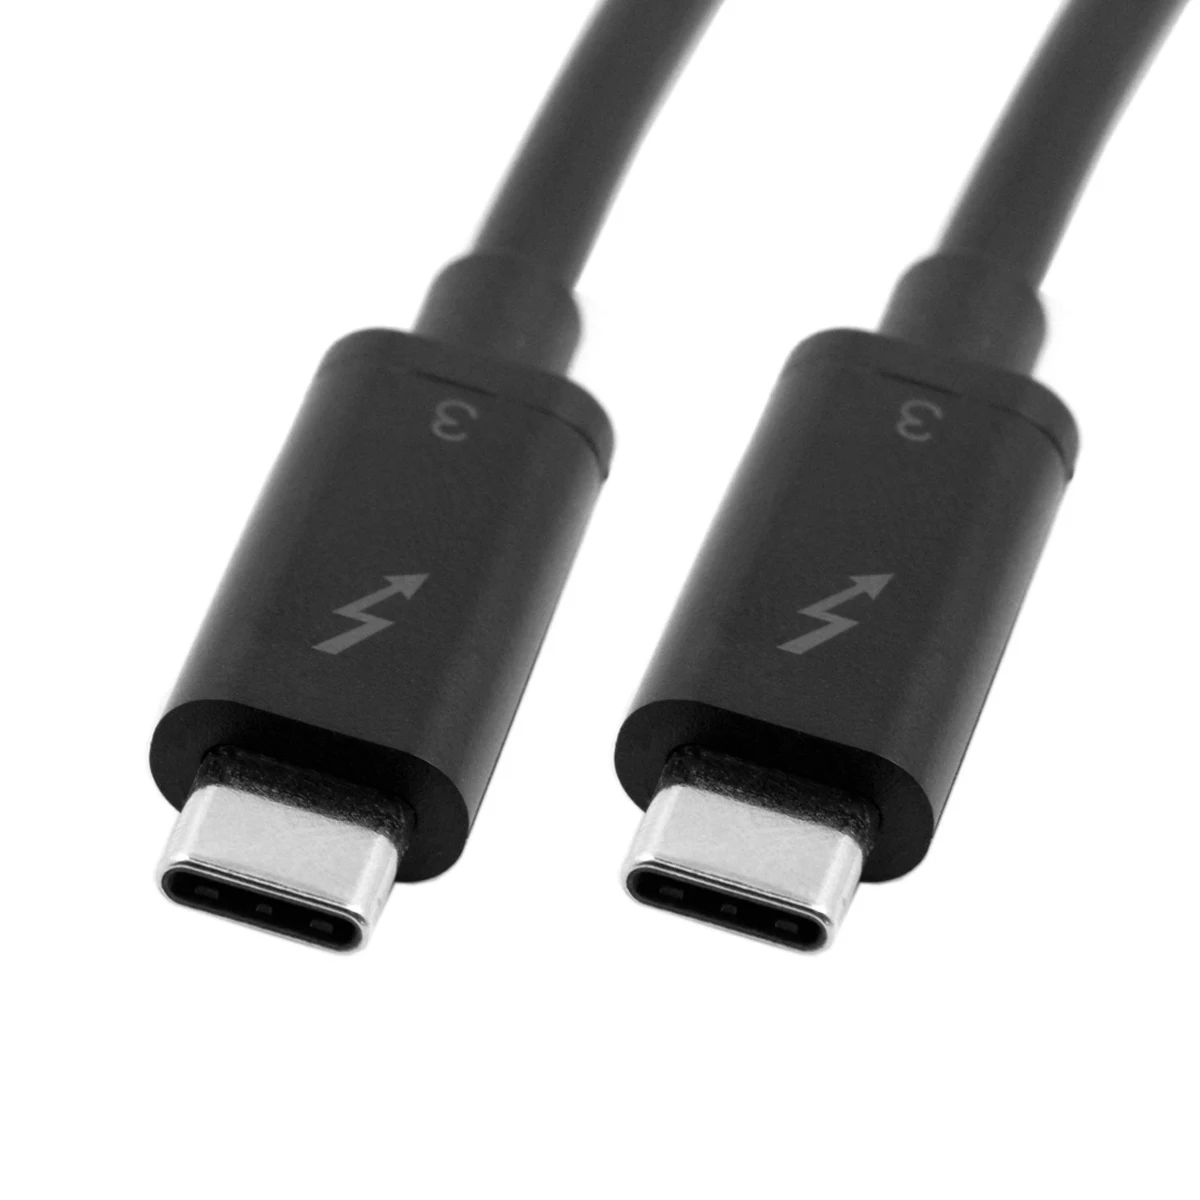 

CY USB4 Type-C Thunderbolt 3 Male to Thunderbolt 3 Male 40Gbps Cable for Macbook Laptop